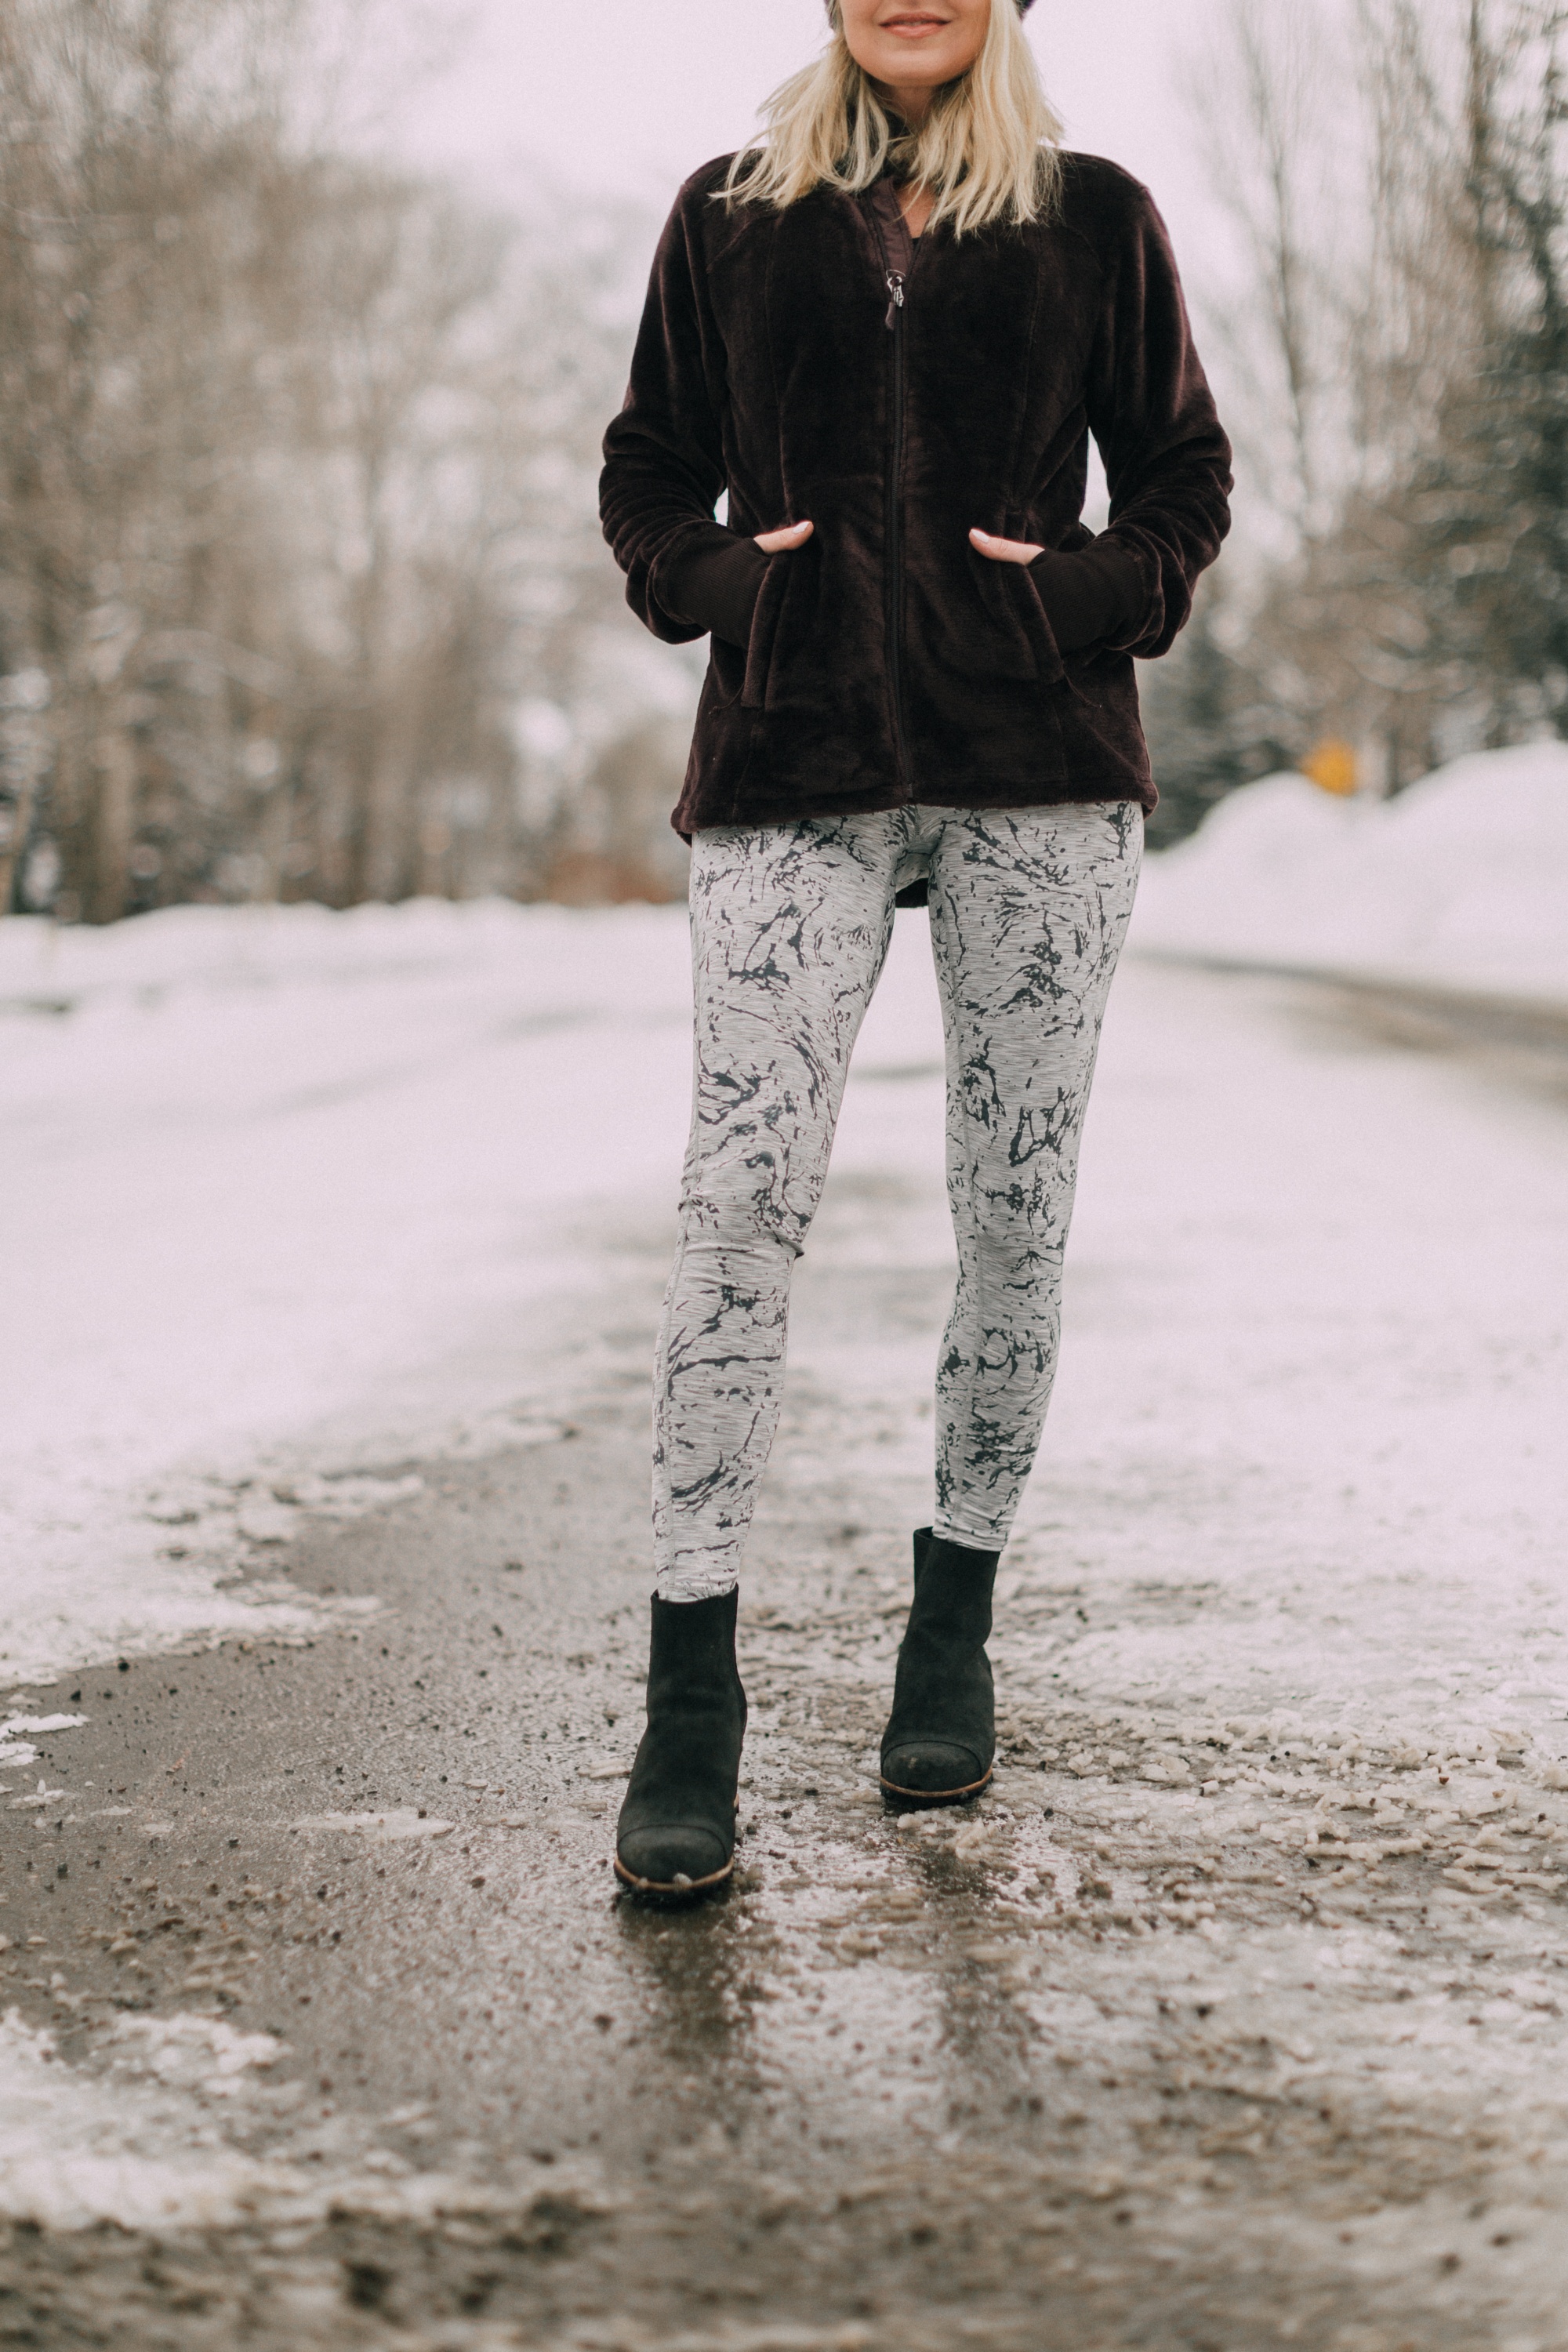 Affordable Reversible Legging, featuring reversible marble printed leggings, breathable tank, and fleece jacket from Jockey worn by fashion blogger over 40, Erin Busbee of BusbeeStyle.com